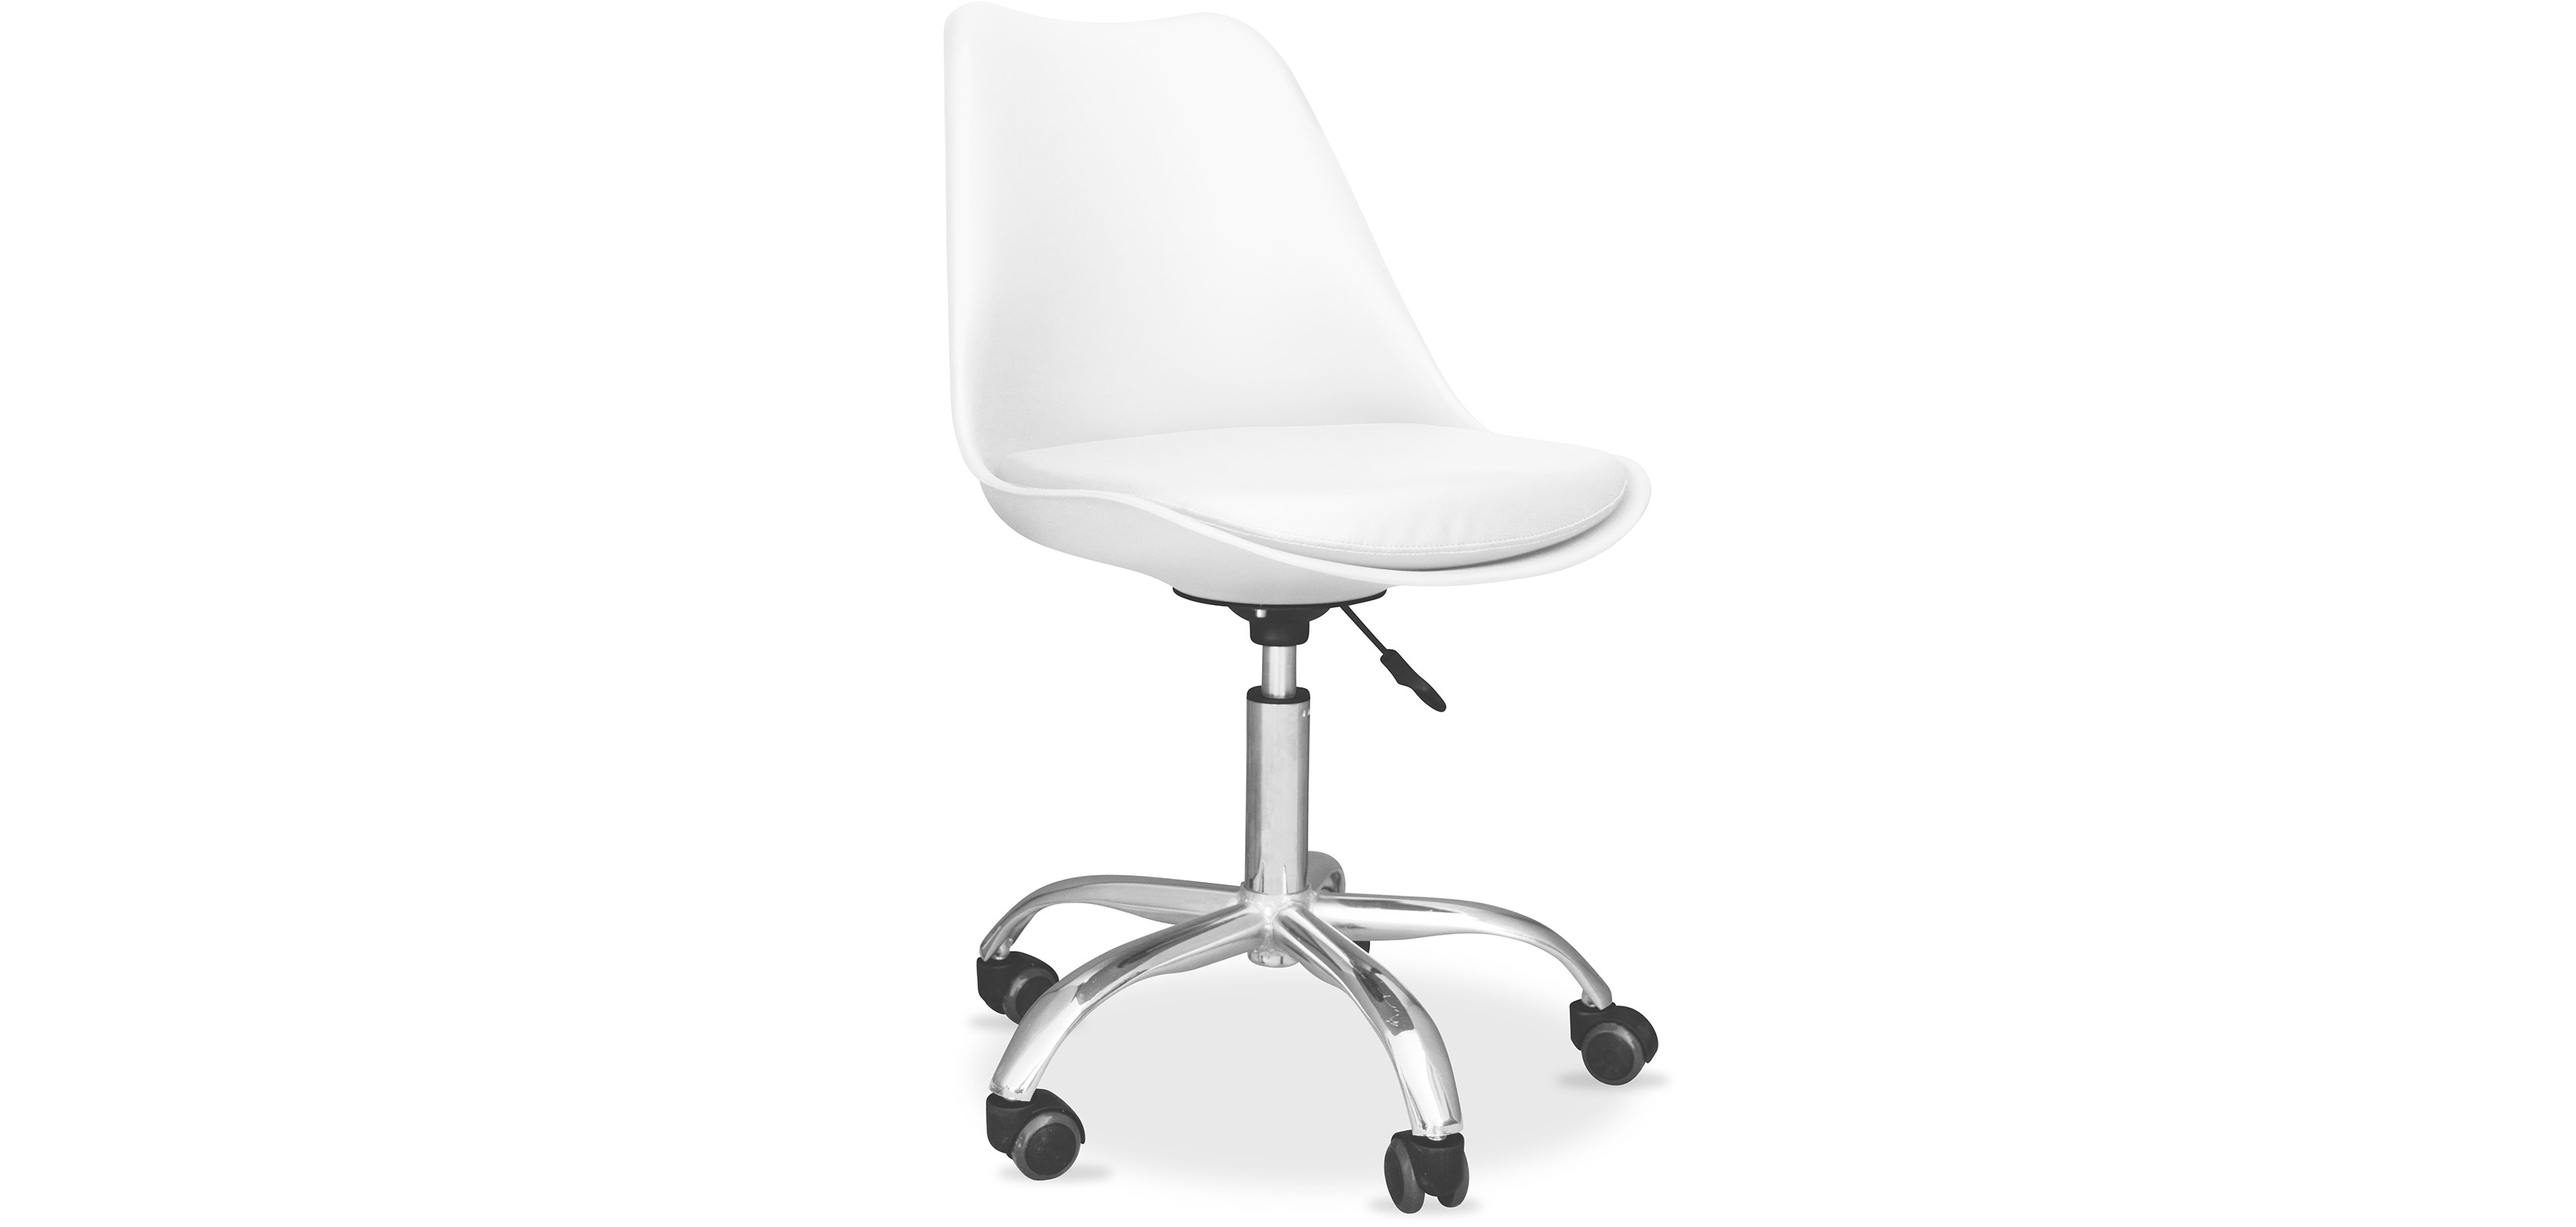 Buy Tulip swivel office chair with wheels White 58487 in